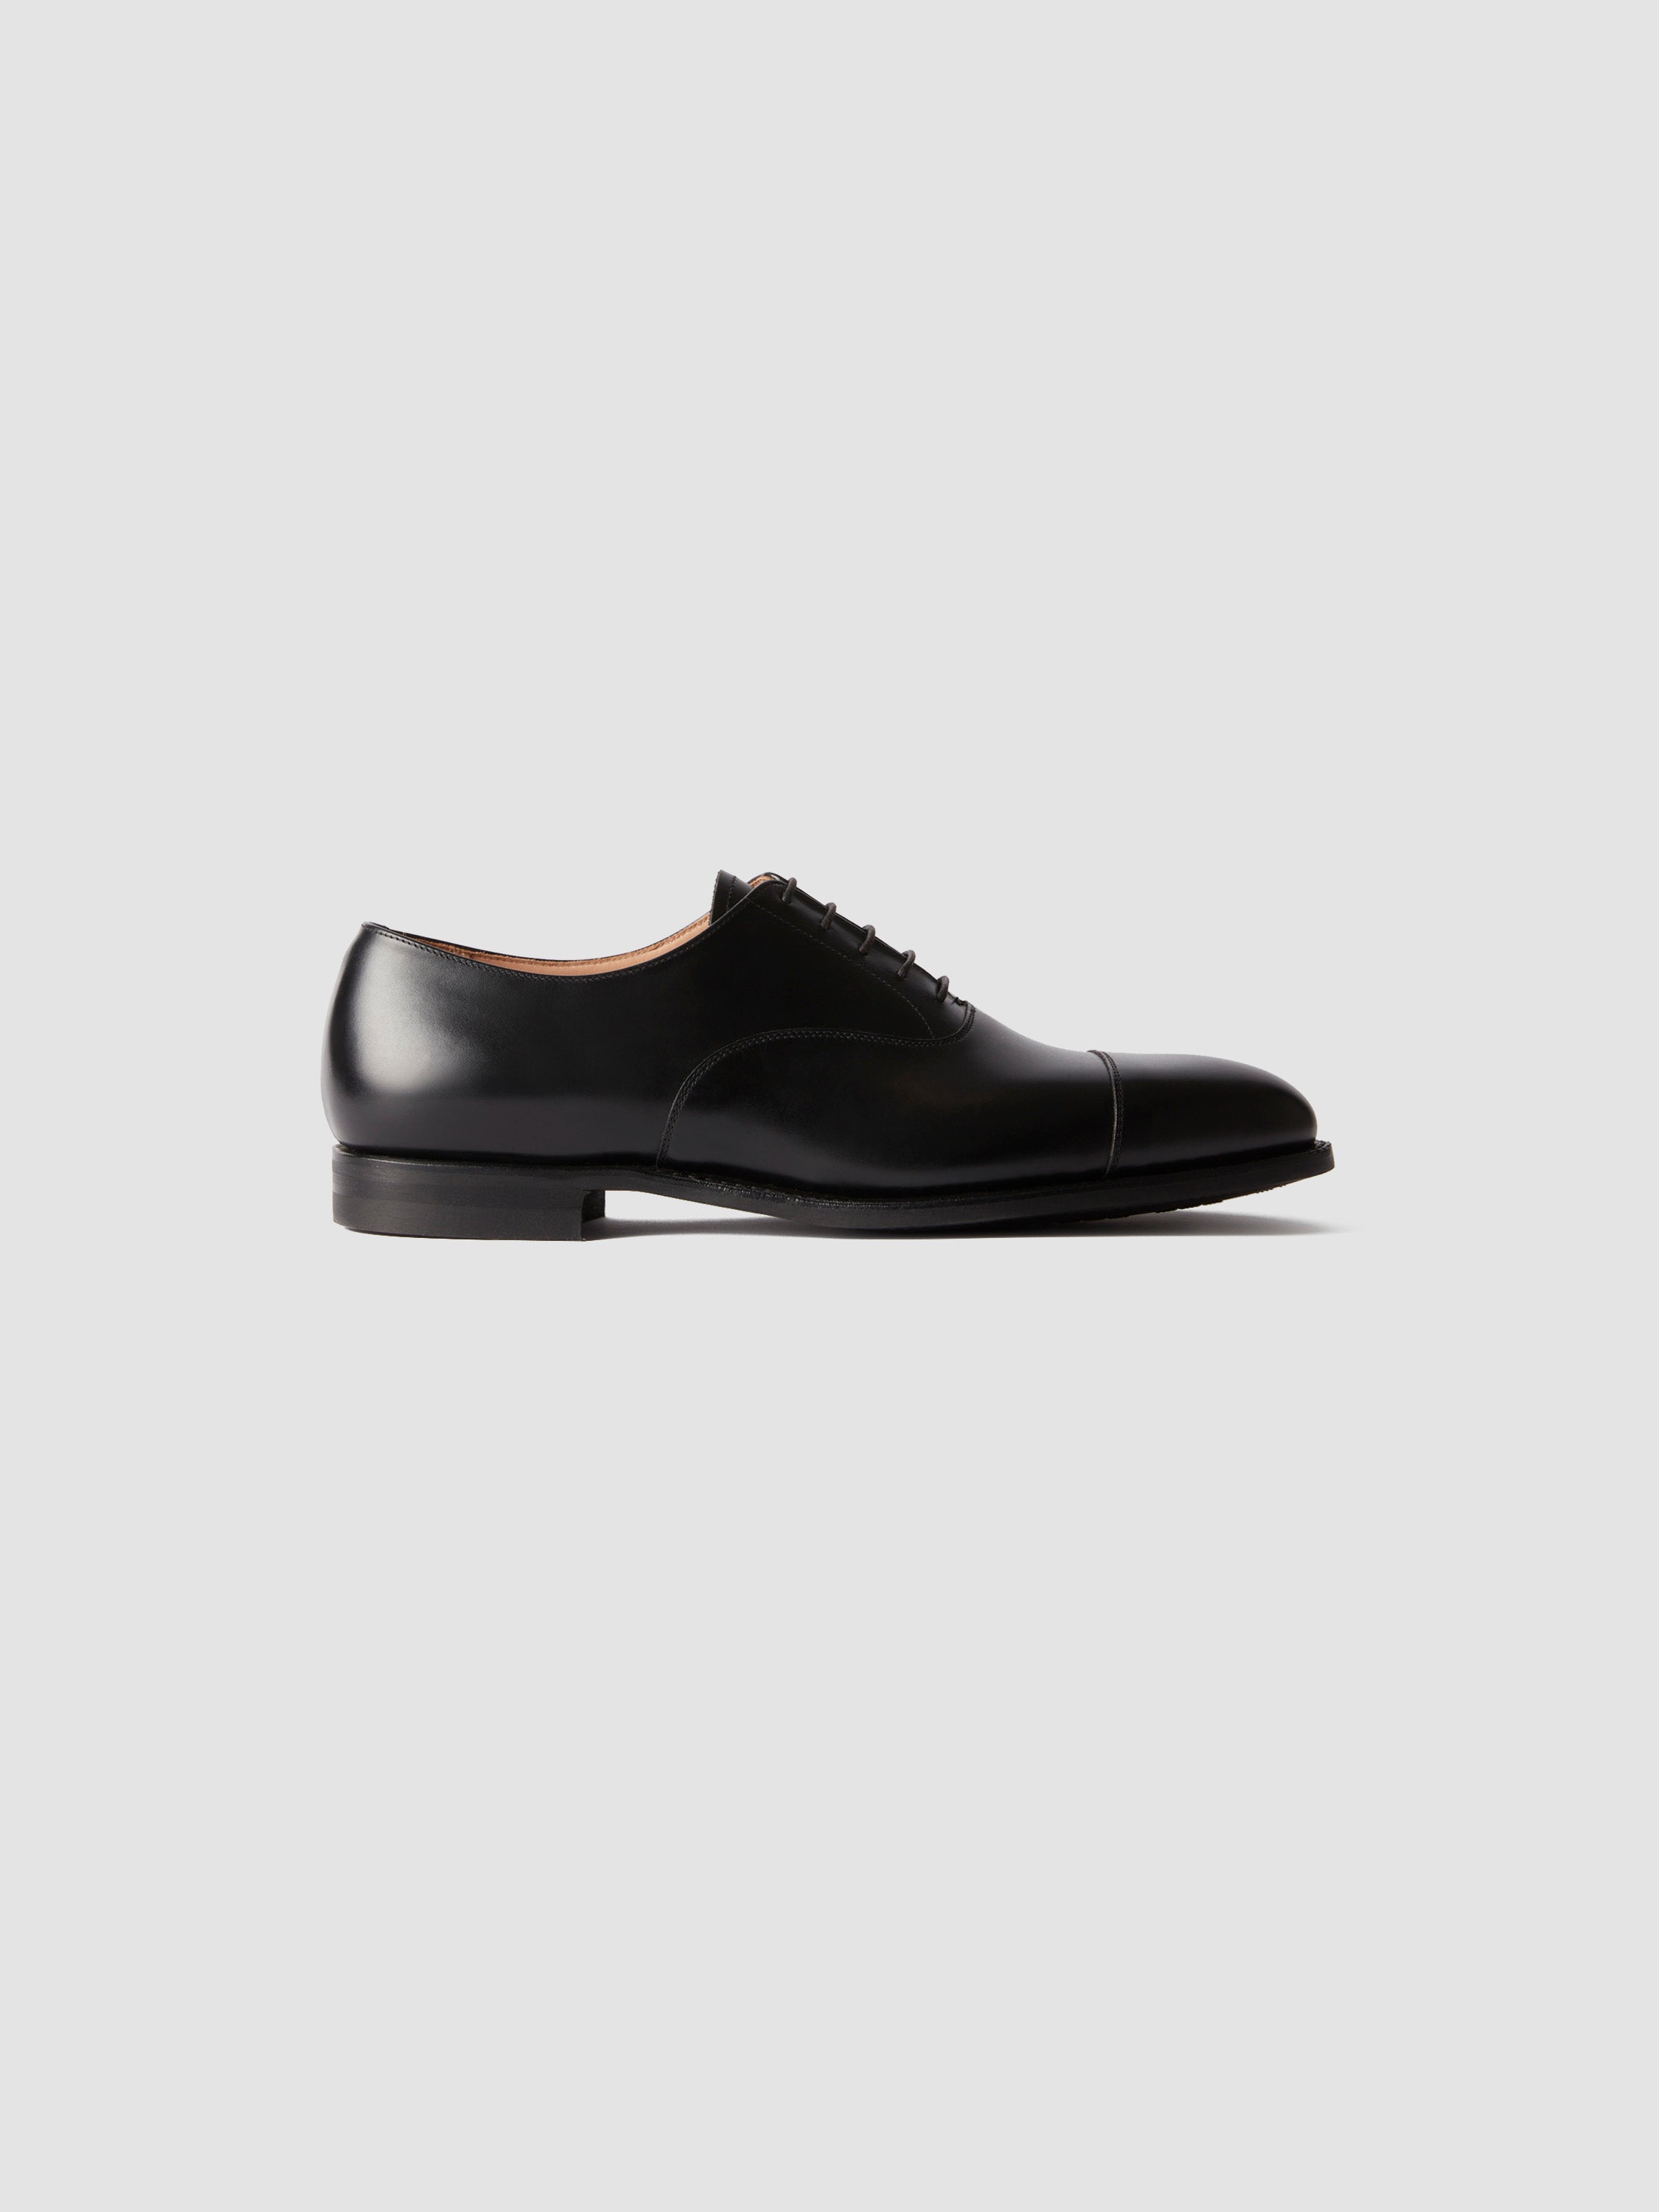 Calf Leather Oxford Shoes Black Product Image Side